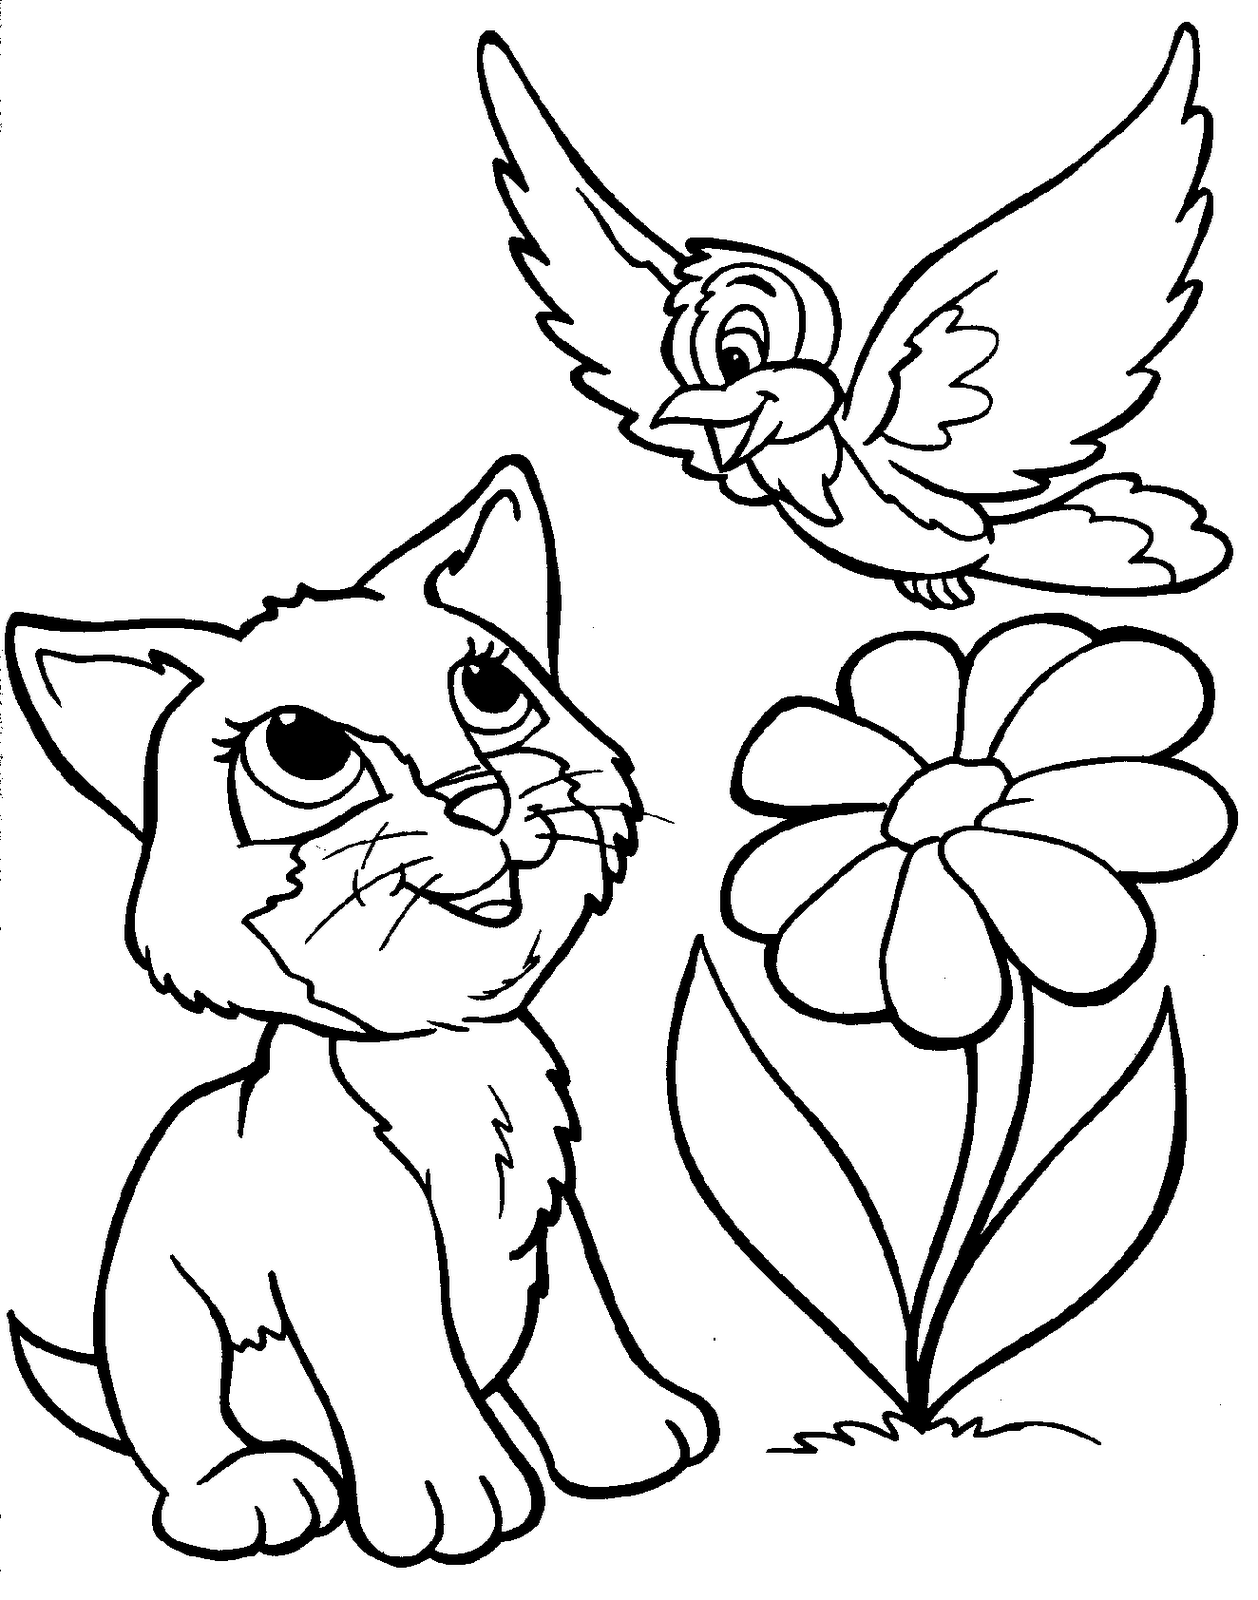 10 Cute Animals Coloring Pages Coloring Wallpapers Download Free Images Wallpaper [coloring654.blogspot.com]